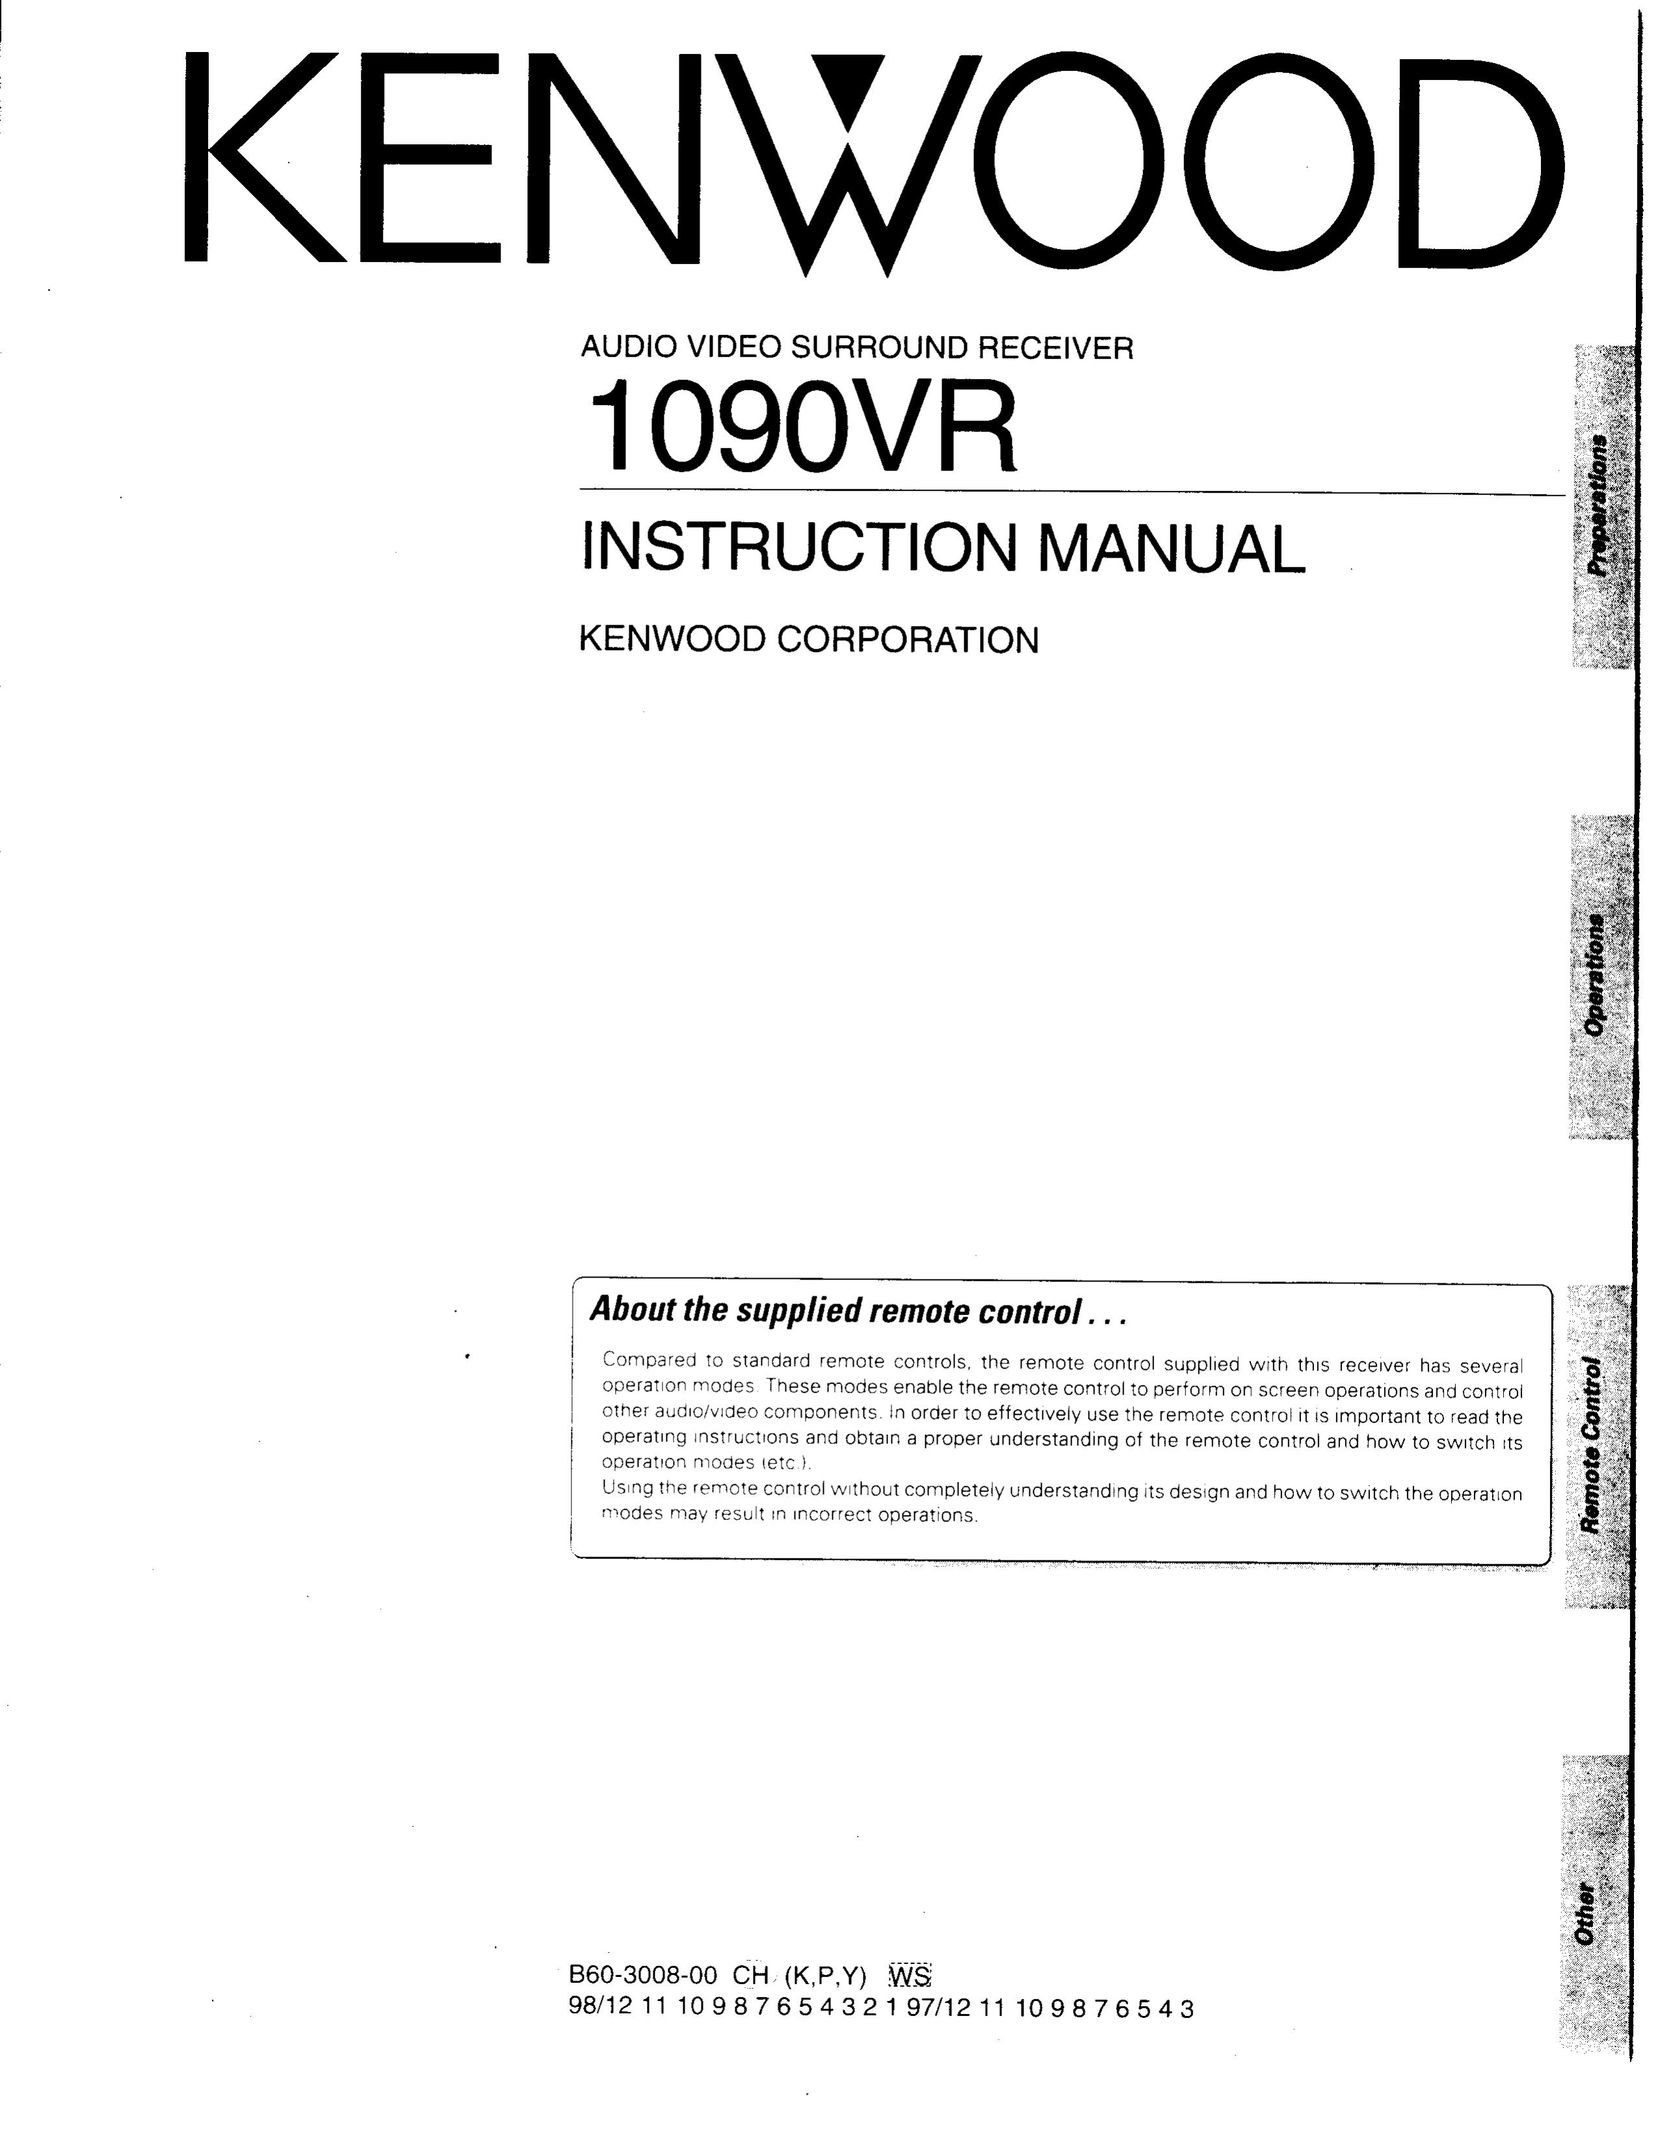 Kenwood 1090VR Home Theater System User Manual